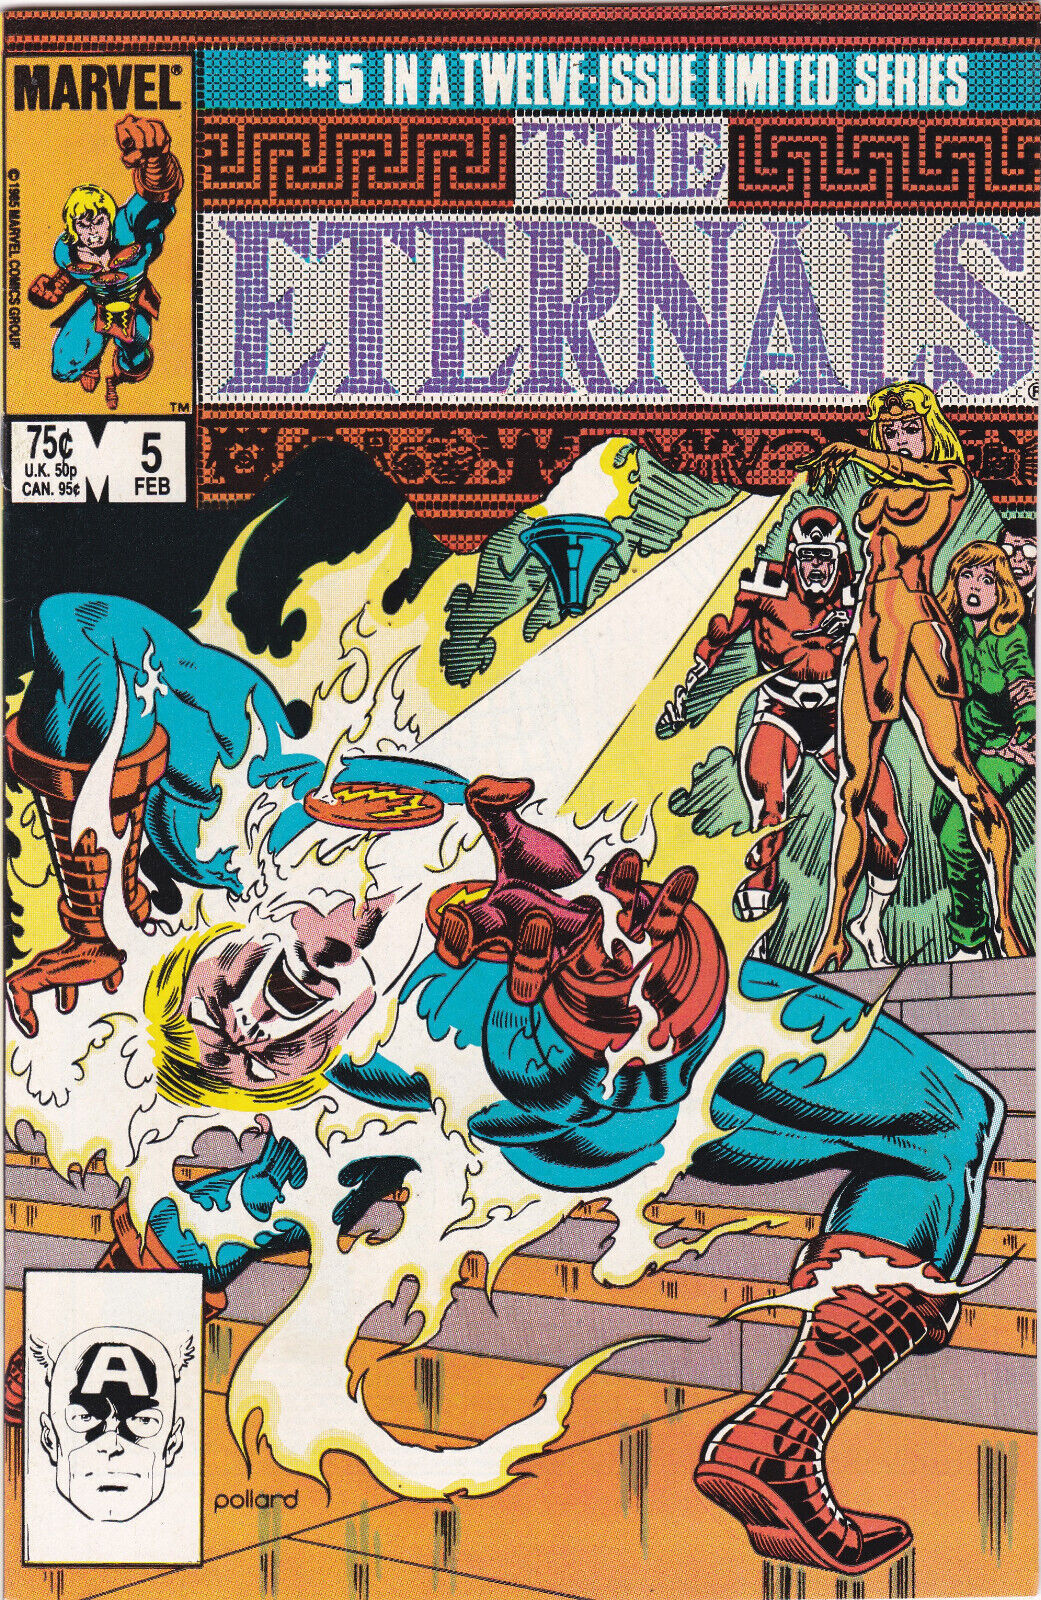 The Eternals, #5 of 12, Marvel Comics, 1985, Copper Age, High Grade,New Movie